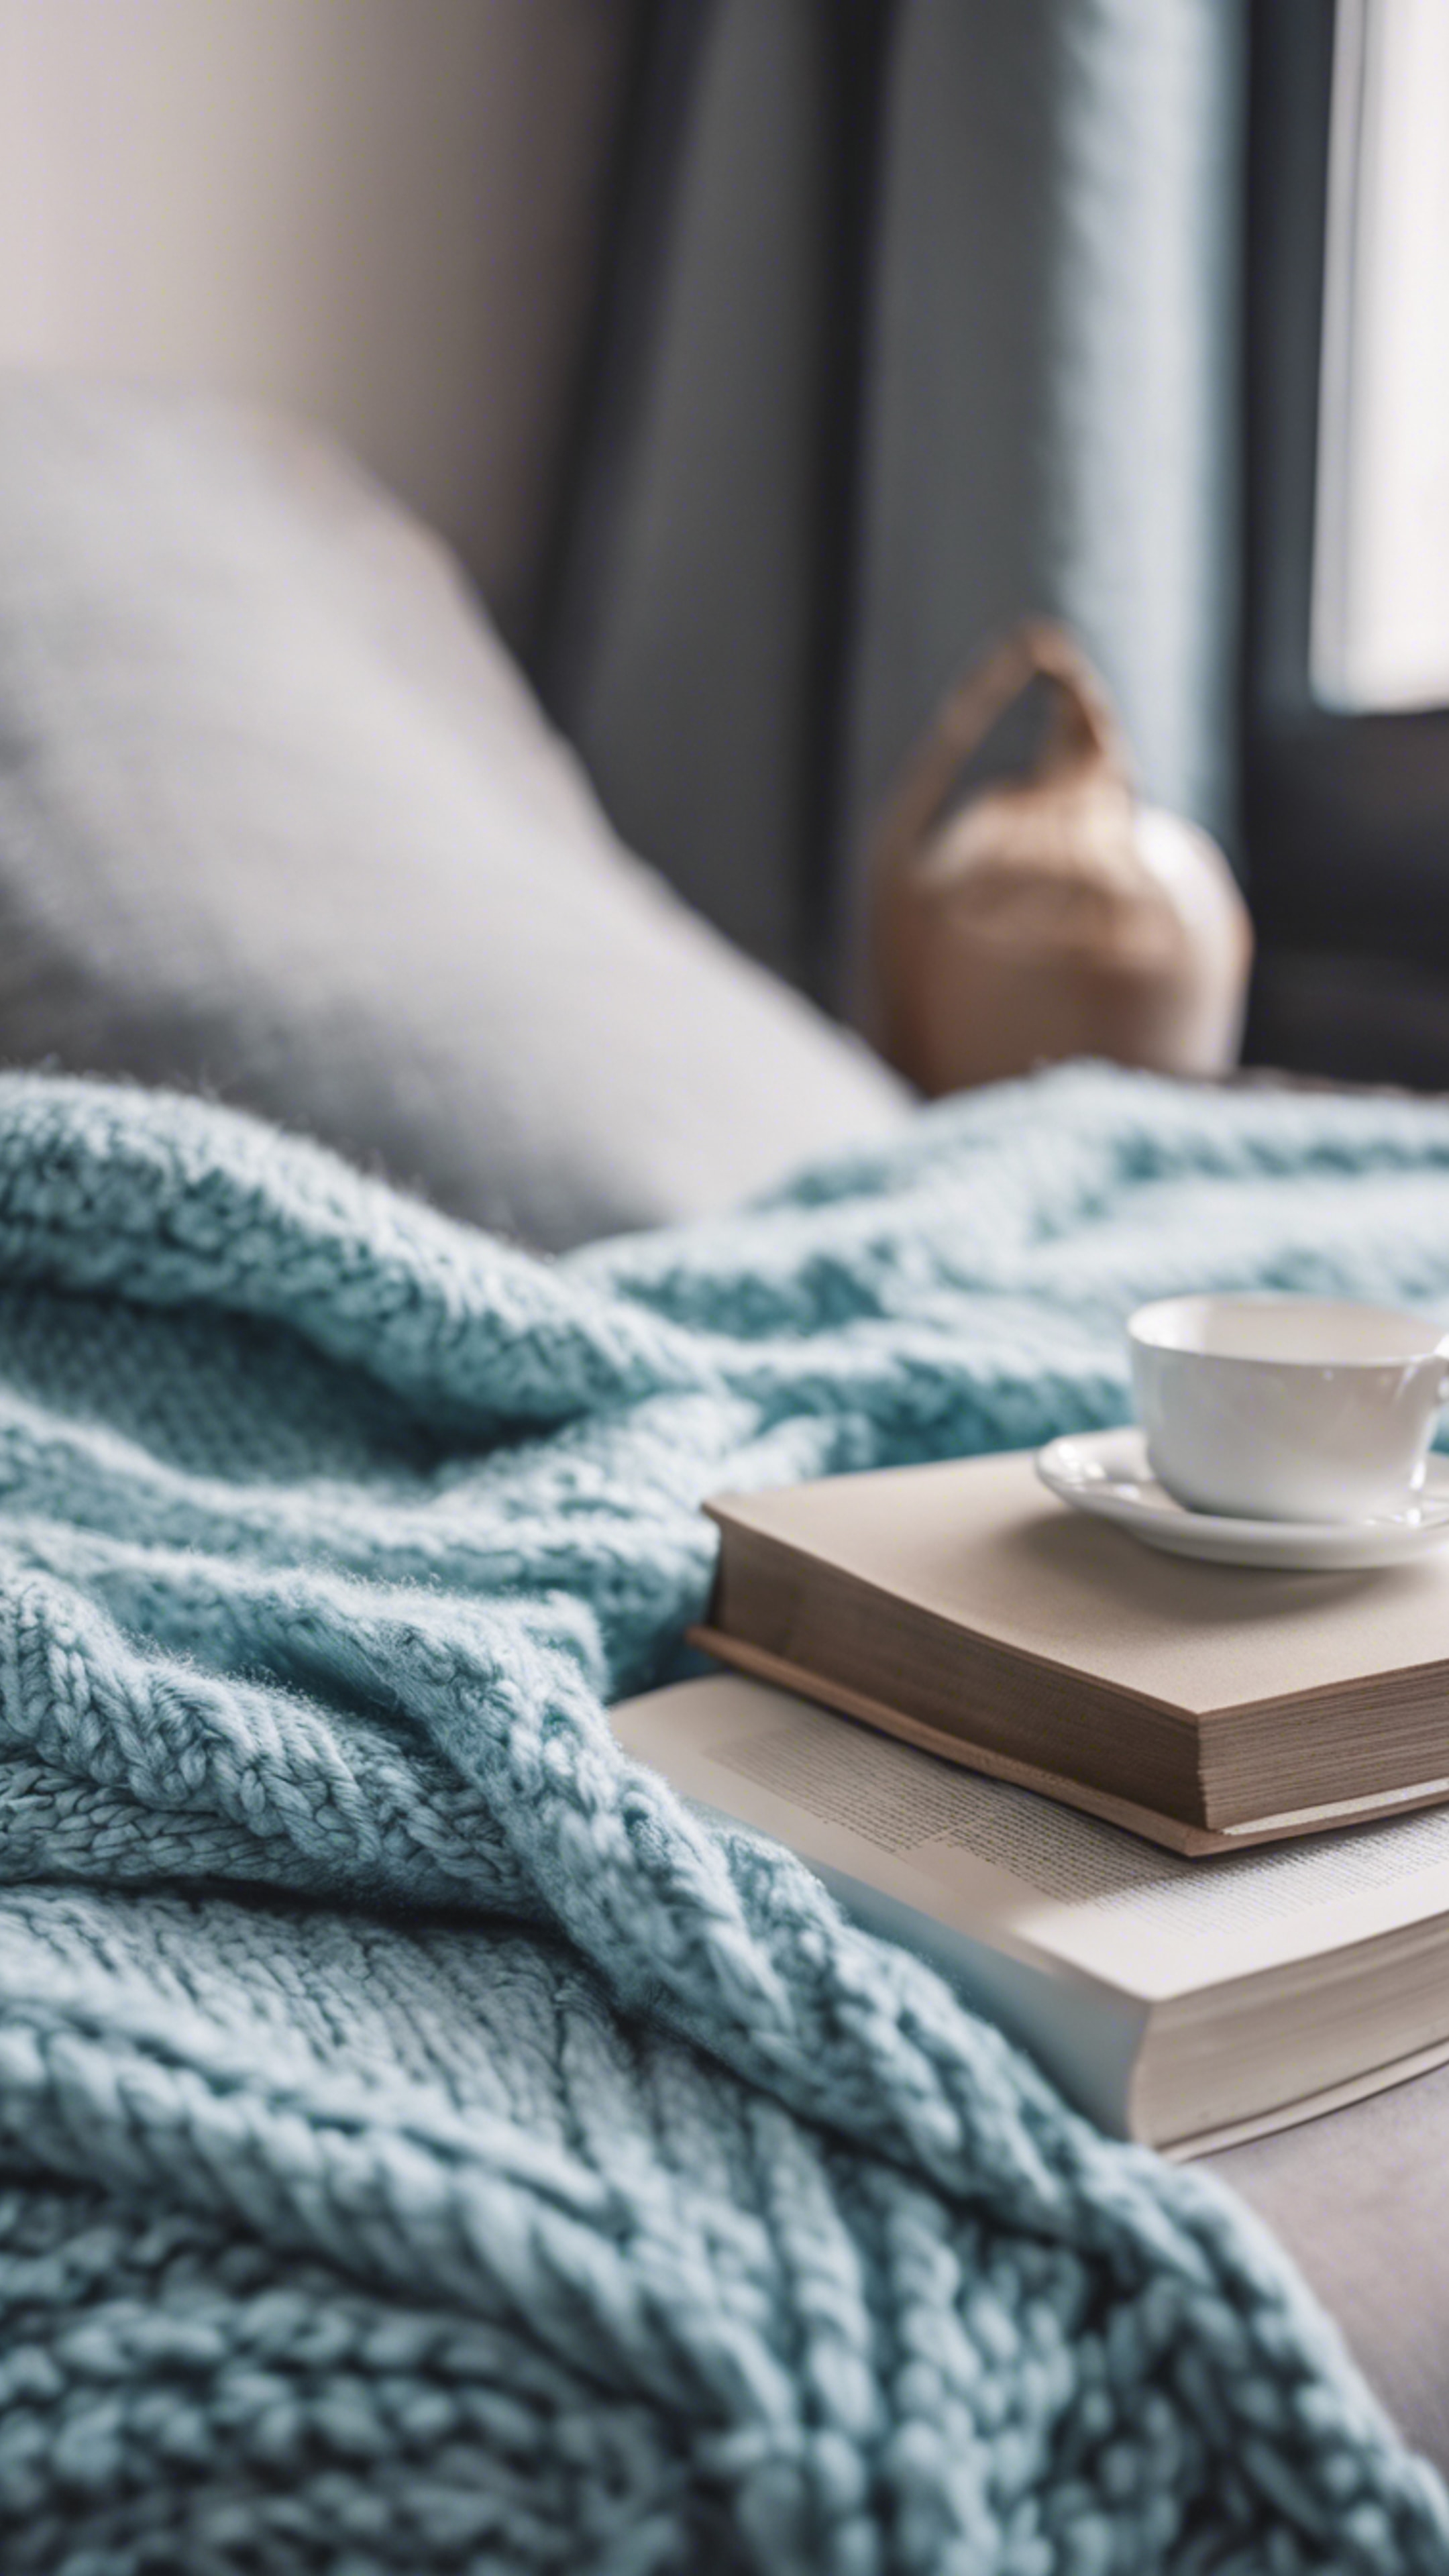 A comfy pastel blue knit blanket on a cozy reading nook. Wallpaper[8b9dbef051e3475cbaed]